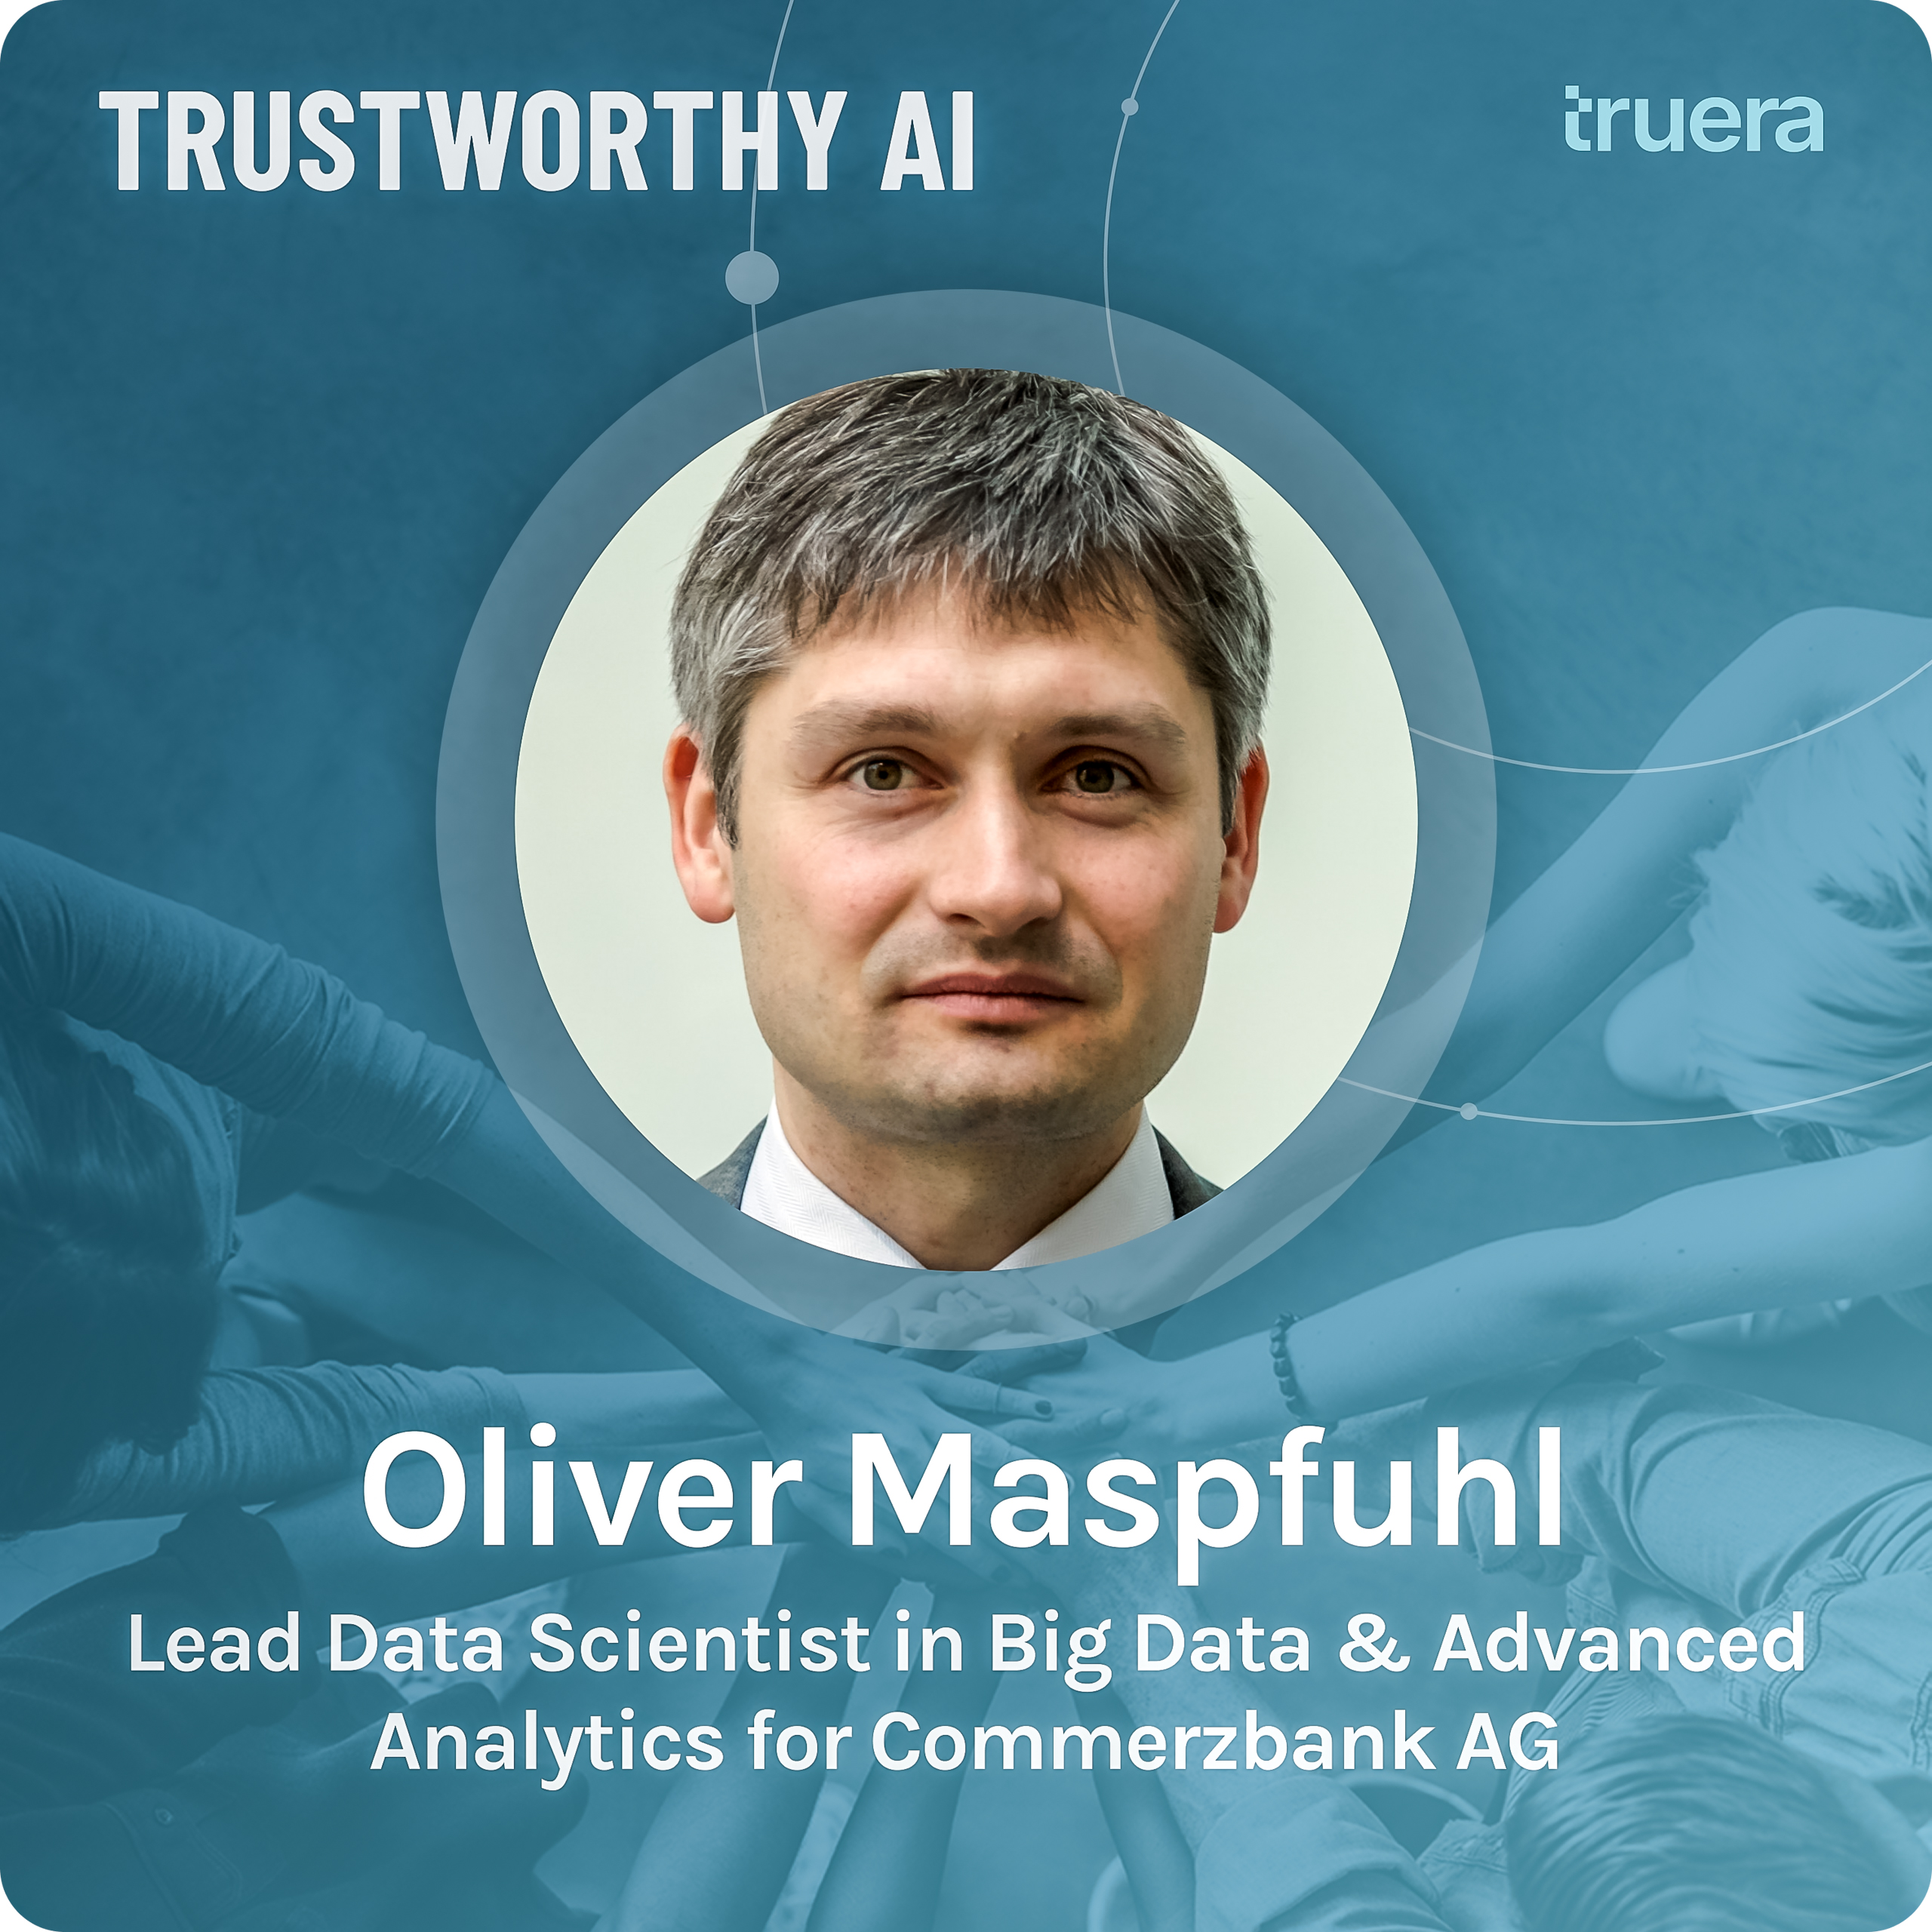 AI in European Banking with Oliver Maspfuhl, Lead Data Scientist in Big Data & Advanced Analytics for Commerzbank AG